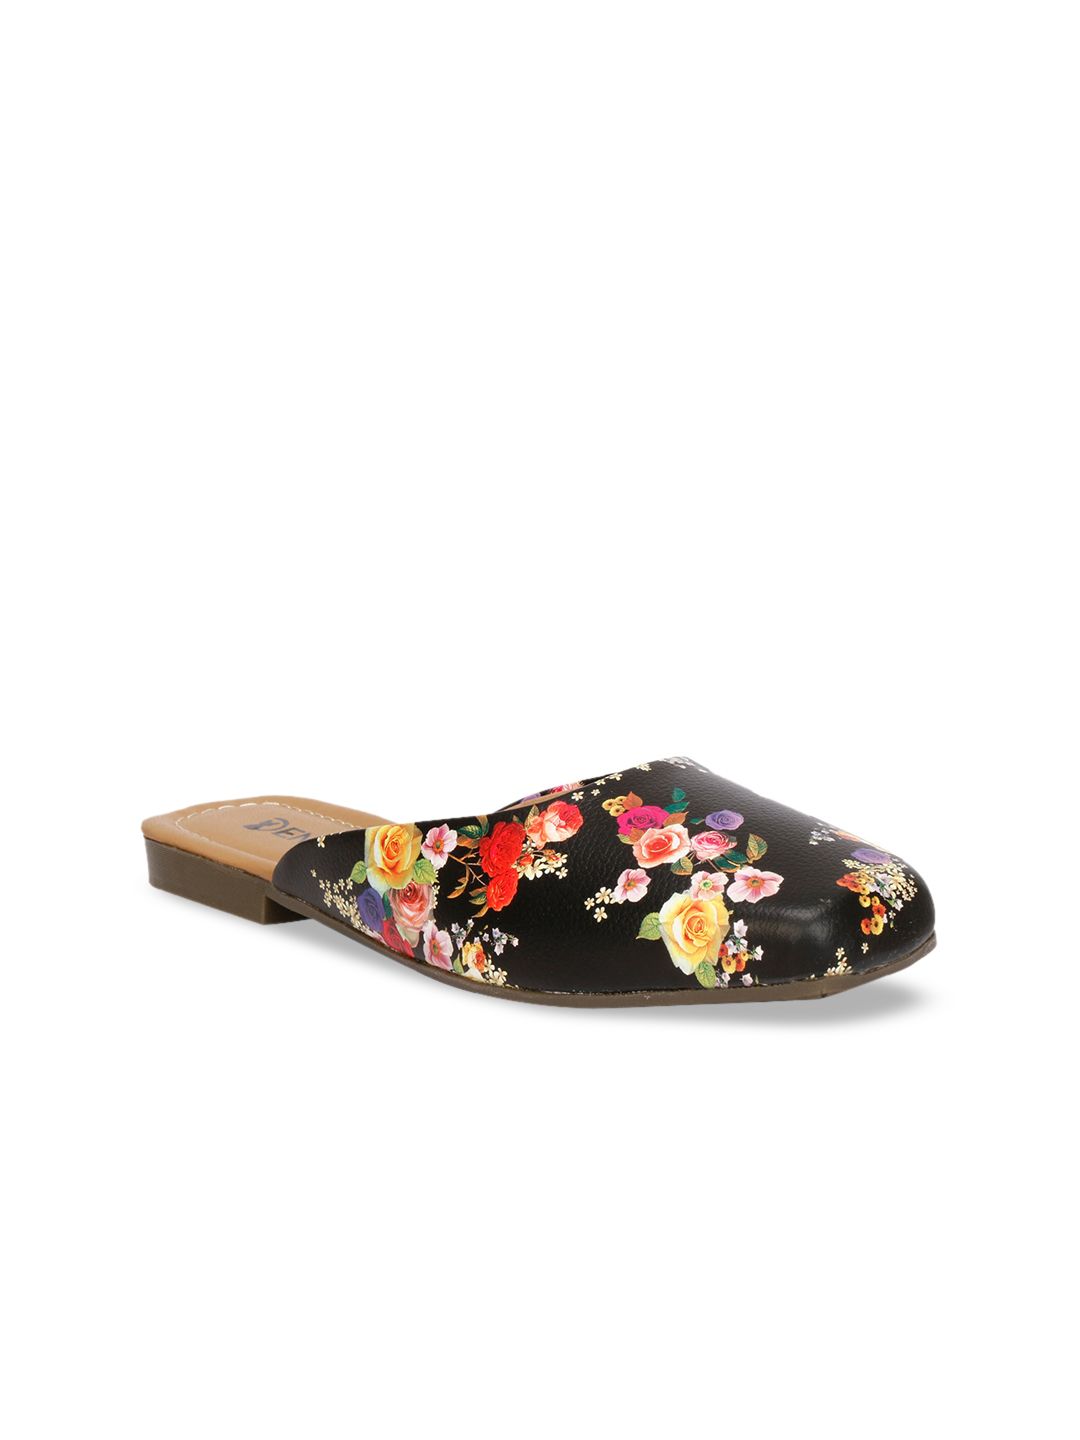 Denill Women Black Floral Printed Slip-On Mules Price in India